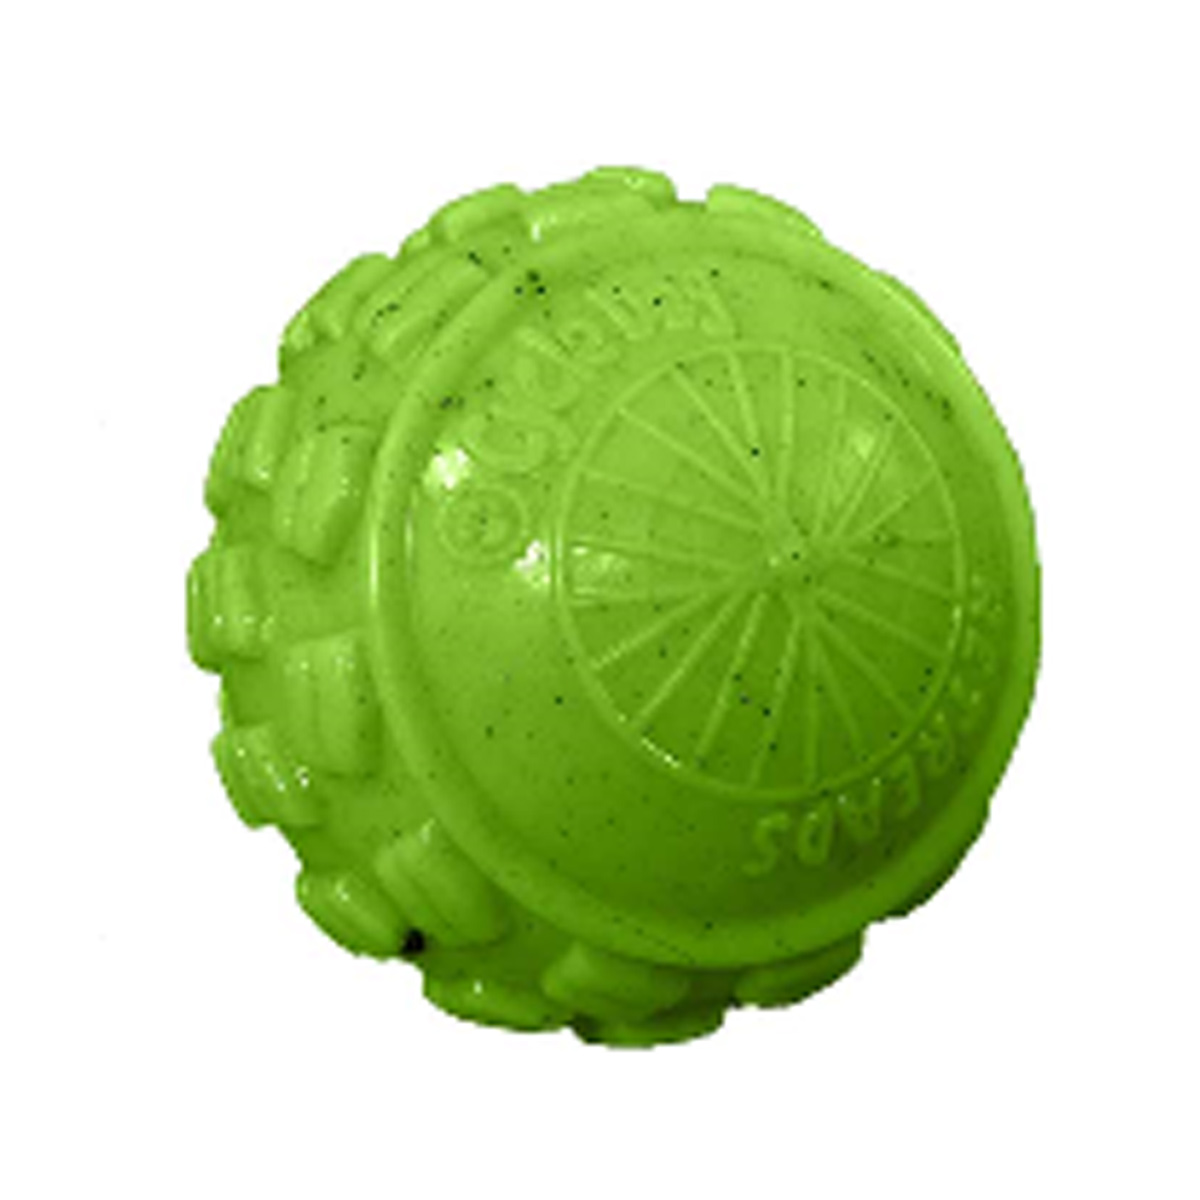 Cycle Dog Ecolast High Roller Ball Dog Toy - Green